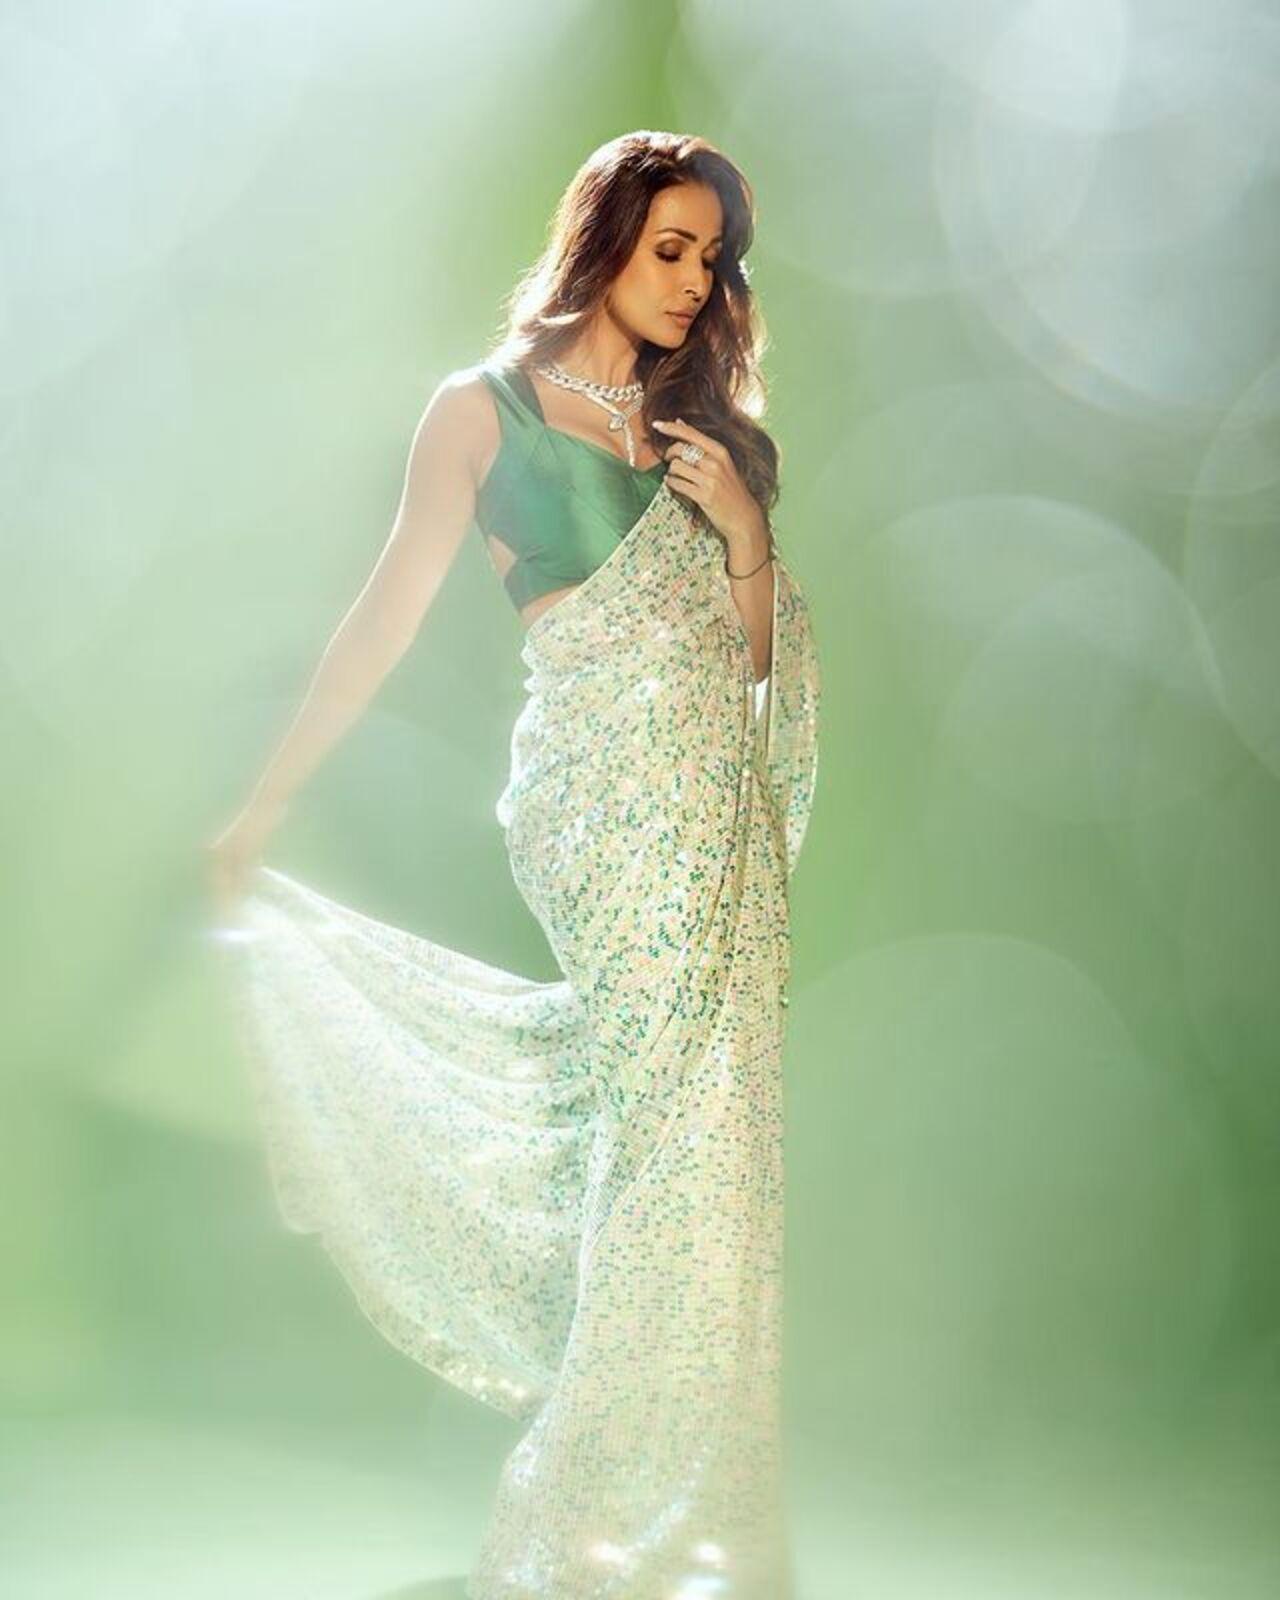 Malaika Arora looked regal in her deep forest green silk blouse and a sequinned silver-green saree. Pair your own Hariyali Teej outfit with a statement necklace like Malaika's as we guaruntee you will look as gorgeous!